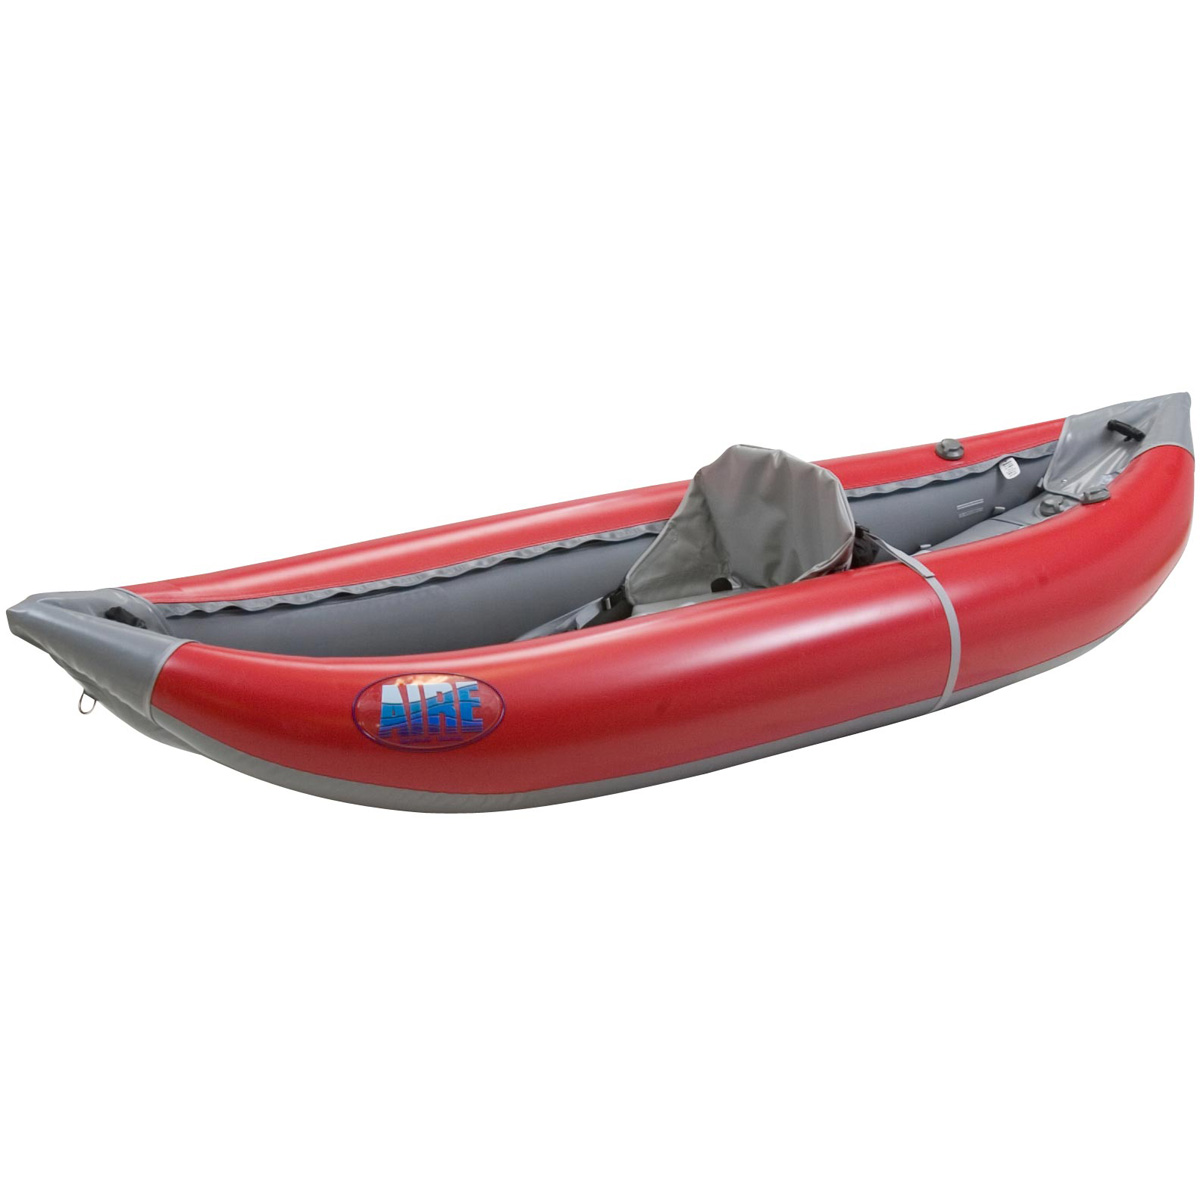 www.rentingglobal.com, renting, global, Singapore, aire outfitter,aire kayak,solo kayak,1 person kayak,kayak,outfitter kayak, Aire Outfitter 1 Person Kayak Red